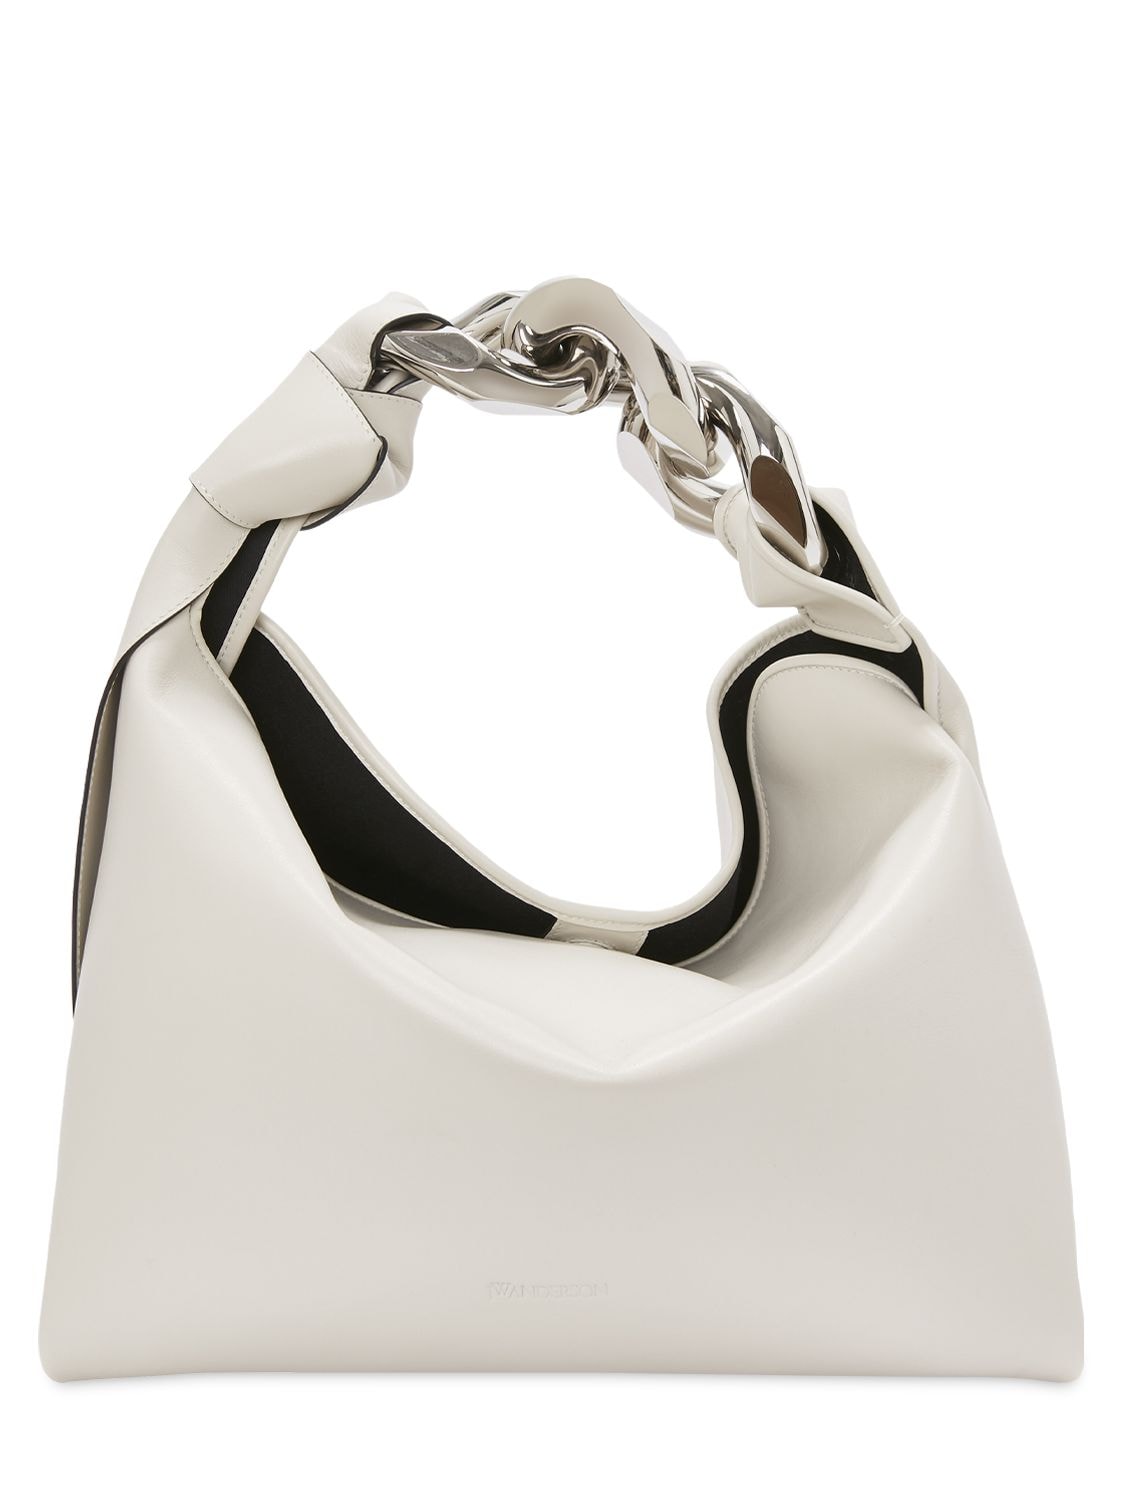 JW ANDERSON SMALL CHAIN LEATHER TOP HANDLE BAG